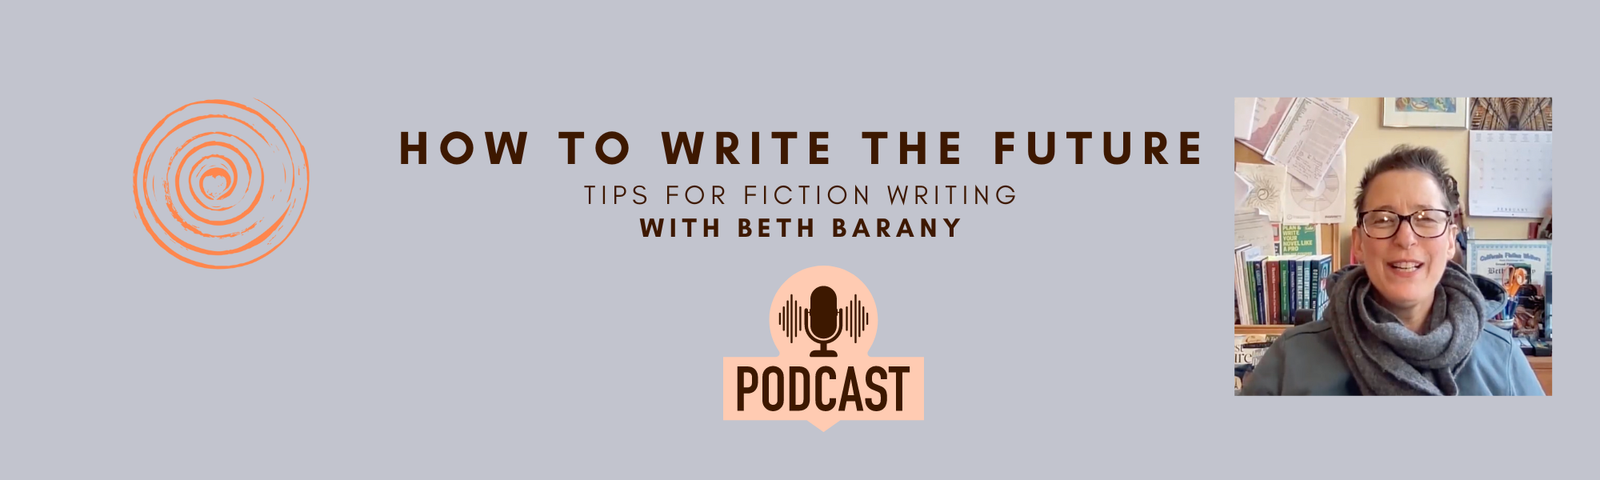 HOW TO WRITE THE FUTURE PODCAST TIPS FOR FICTION WRITING WITH BETH BARANY